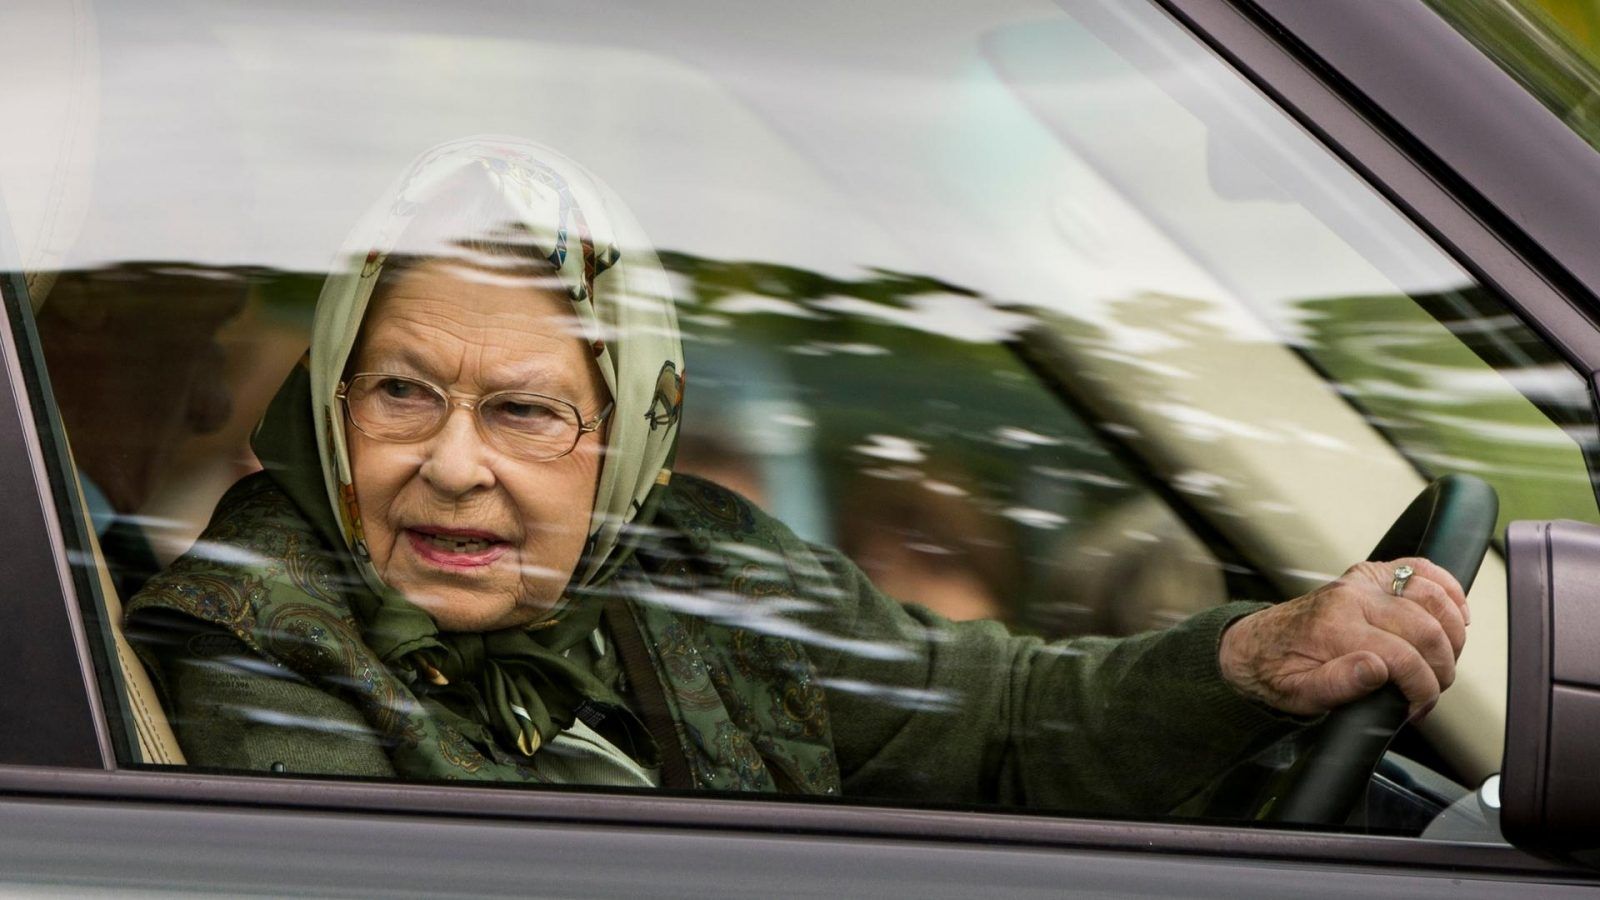 In Photos: Queen Elizabeth II's love of driving and luxury cars